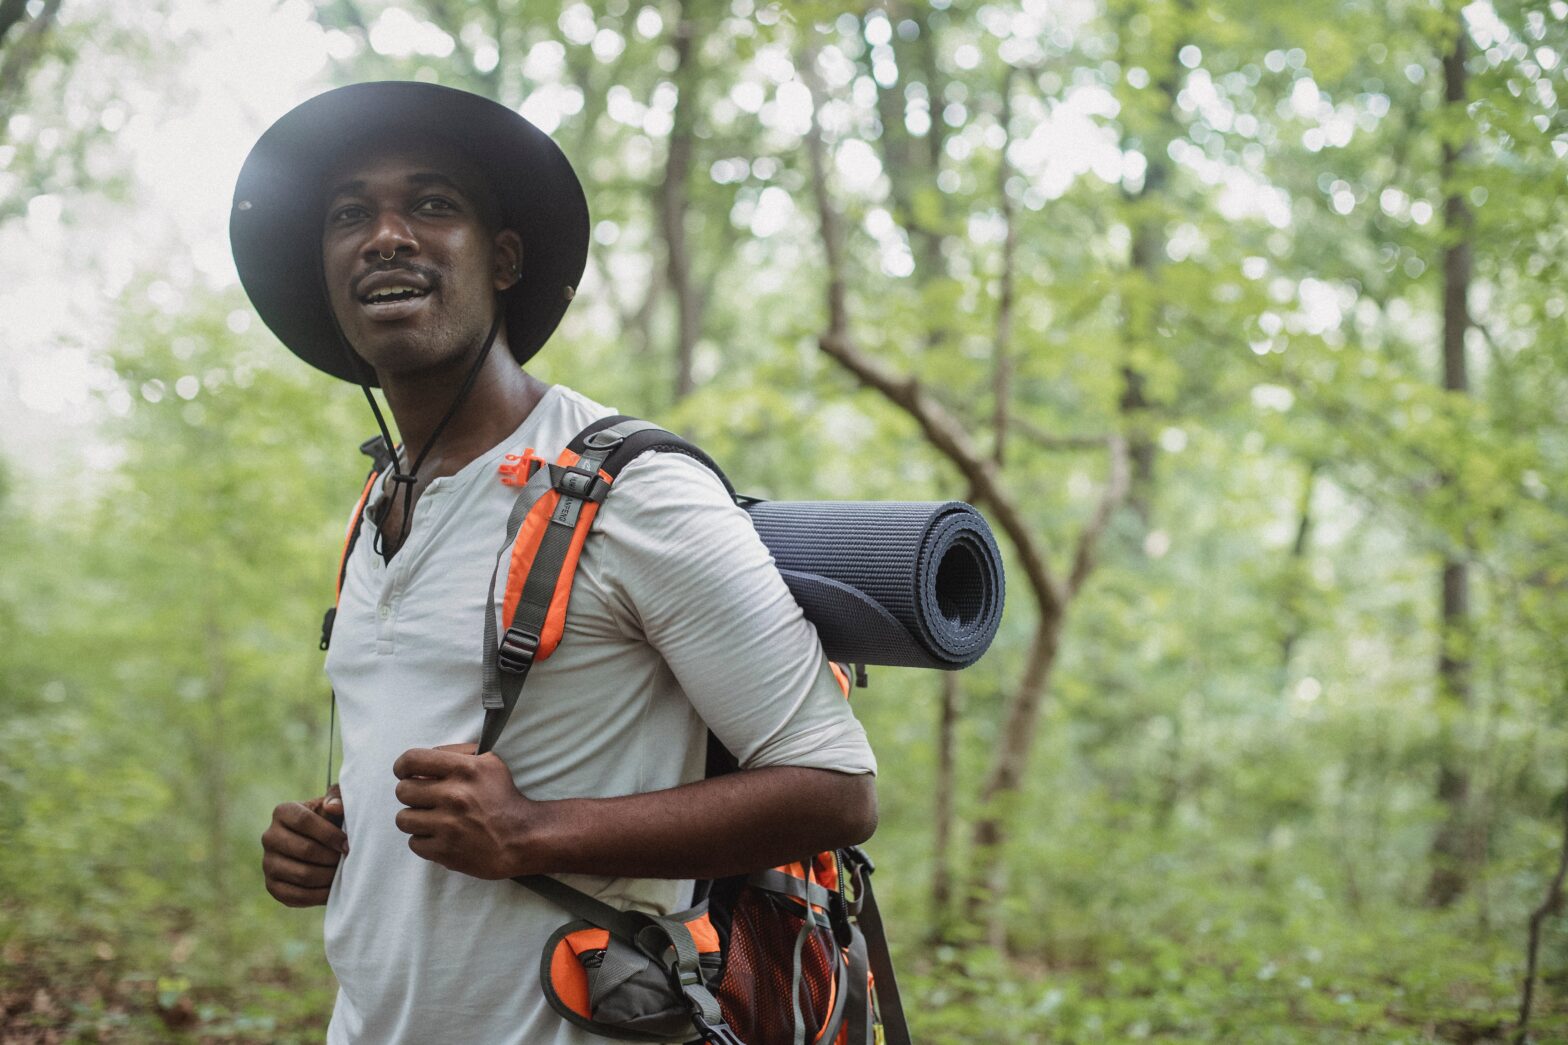 Looking For A Black Hiking Community To Get You Moving This Spring?